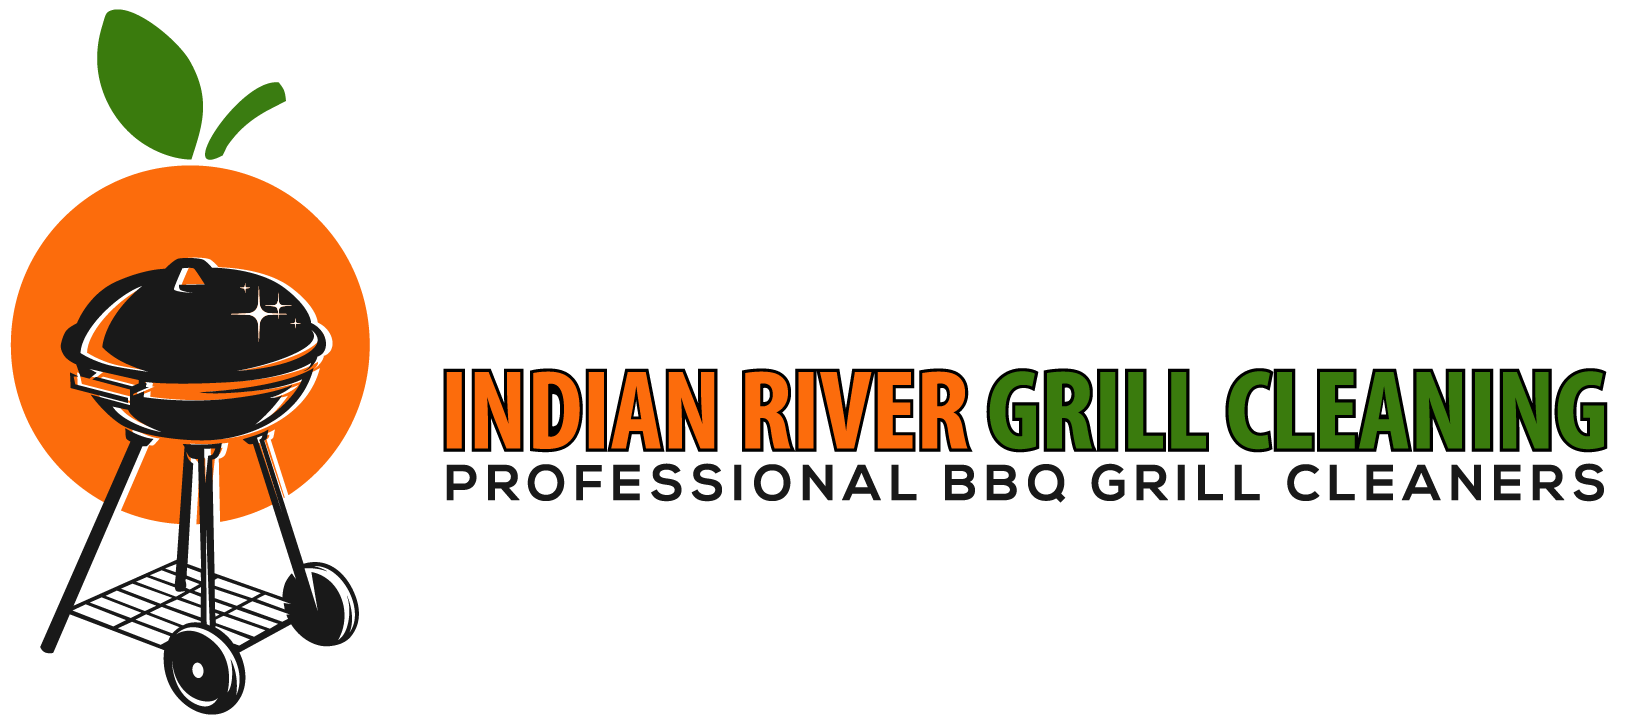 https://indianrivergrillcleaning.com/wp-content/uploads/2020/01/Indian-River-Grill-Cleaning-01dk.png